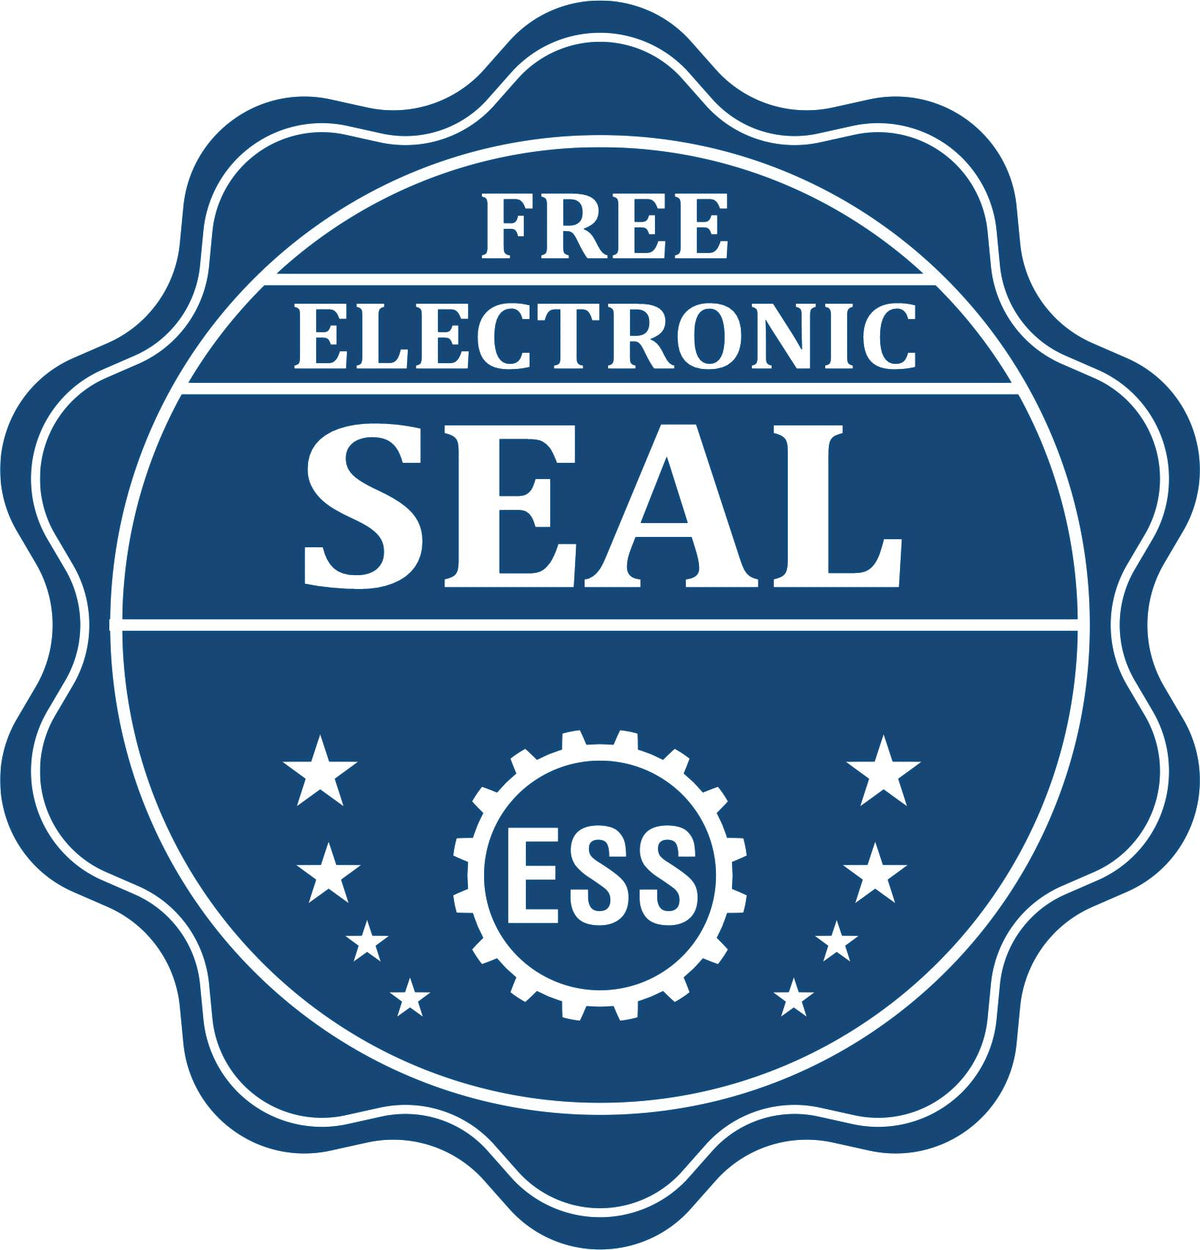 A badge showing a free electronic seal for the Gift Idaho Architect Seal with stars and the ESS gear on the emblem.